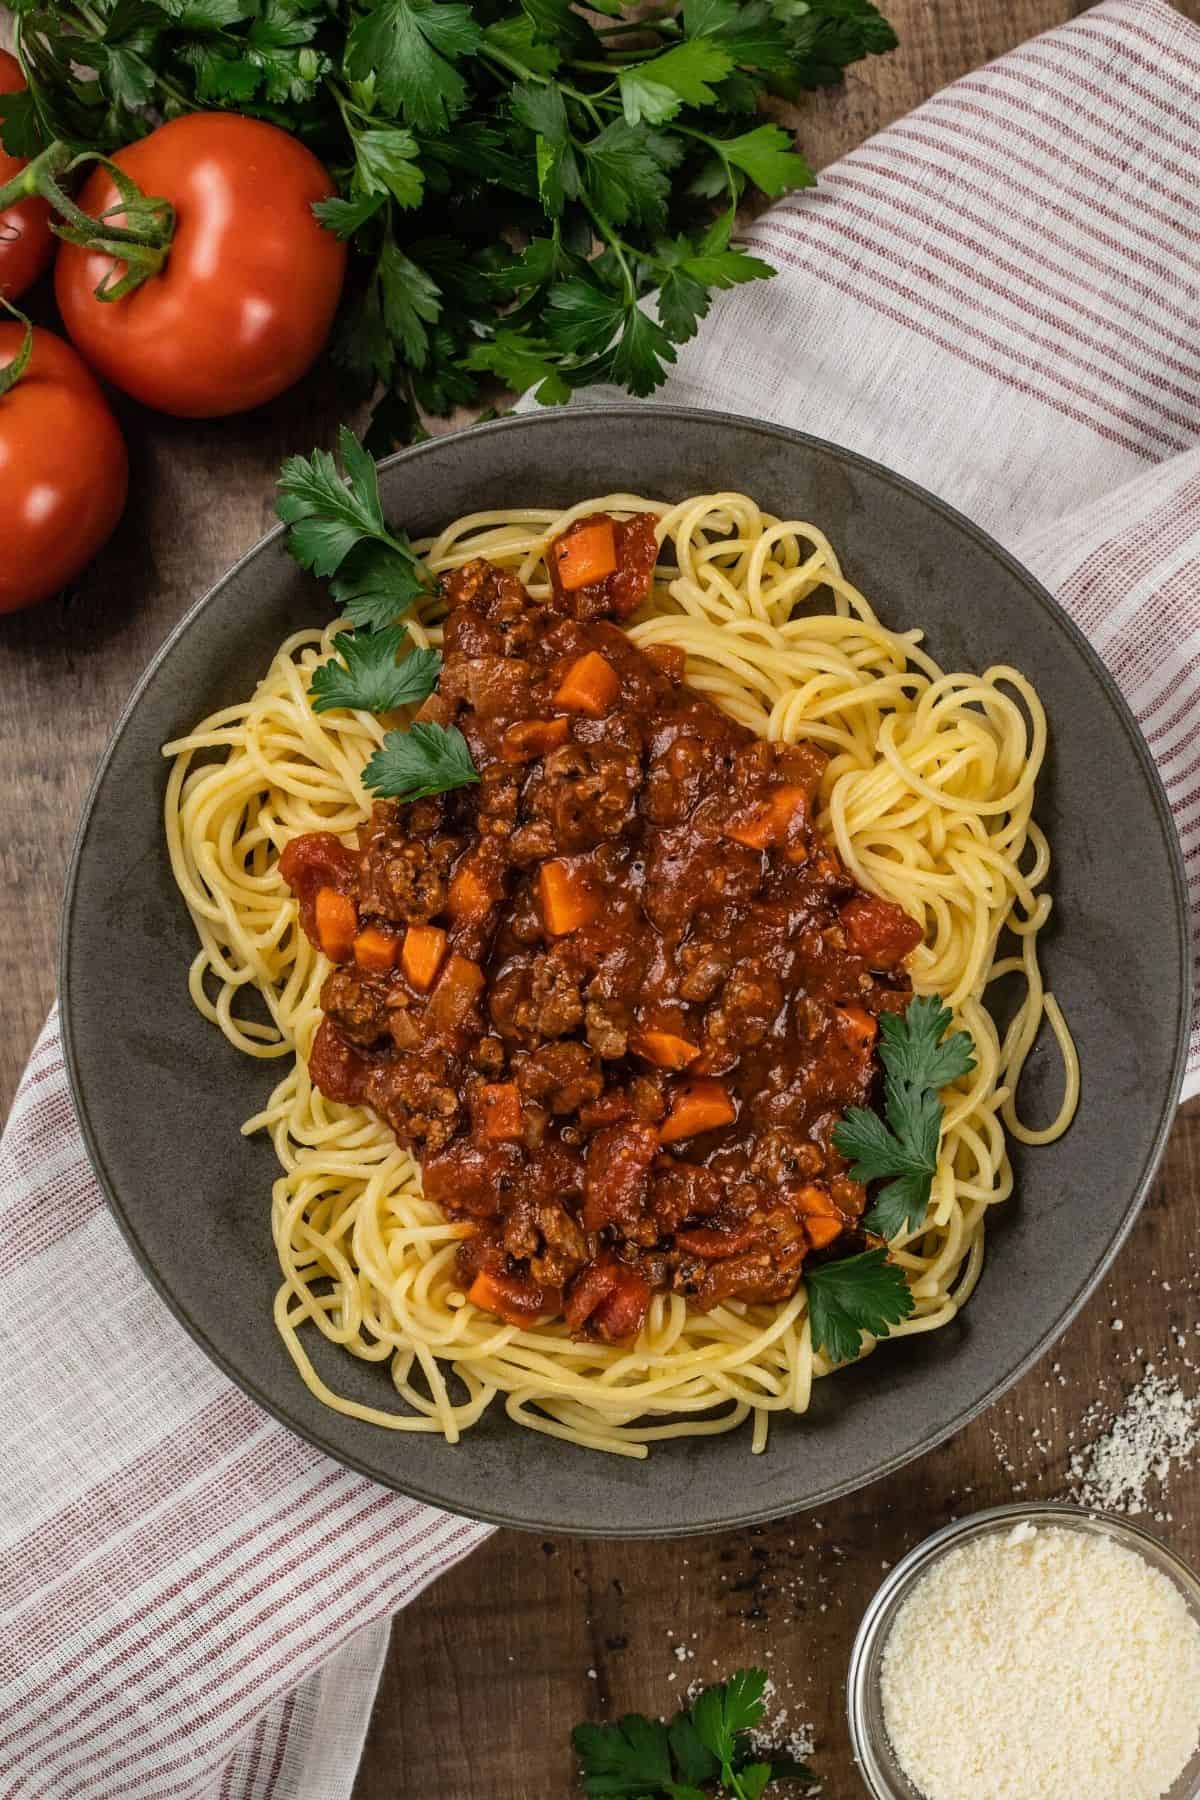 A big bowl filled with spaghetti and beef bolognese sauce is sprinkled with fresh parsley. More parsley, tomatoes, and a small bowl of parmesan cheese are next to the bowl as it rests on a red and white towel on a wood table.